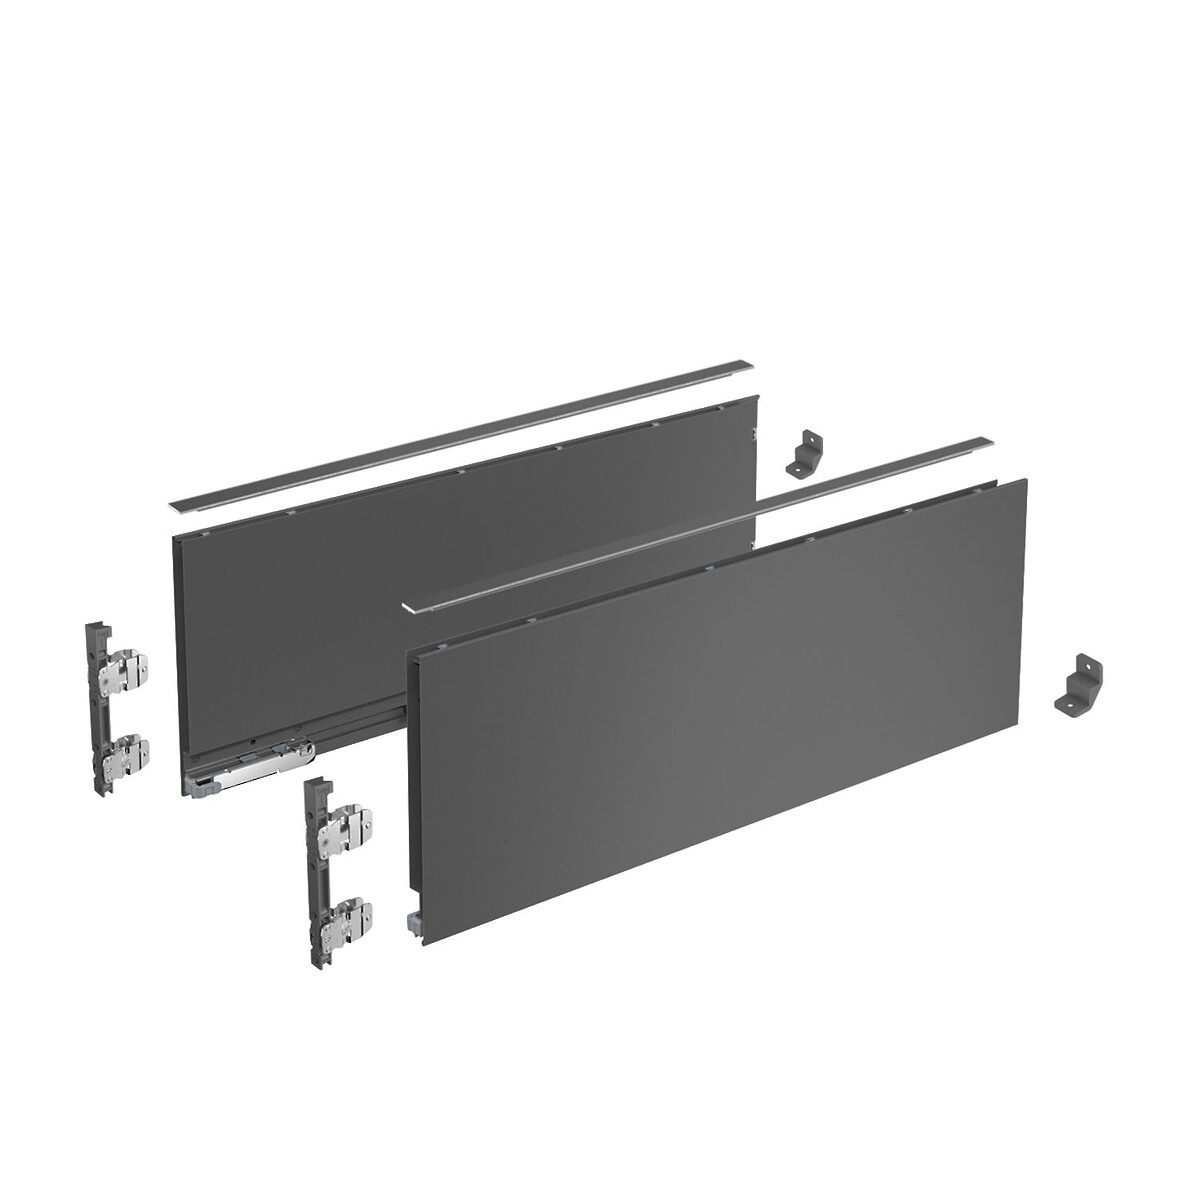 AvanTech YOU Drawer side profile set, height 187 mm x NL 350 mm, Anthracite, Left and Right